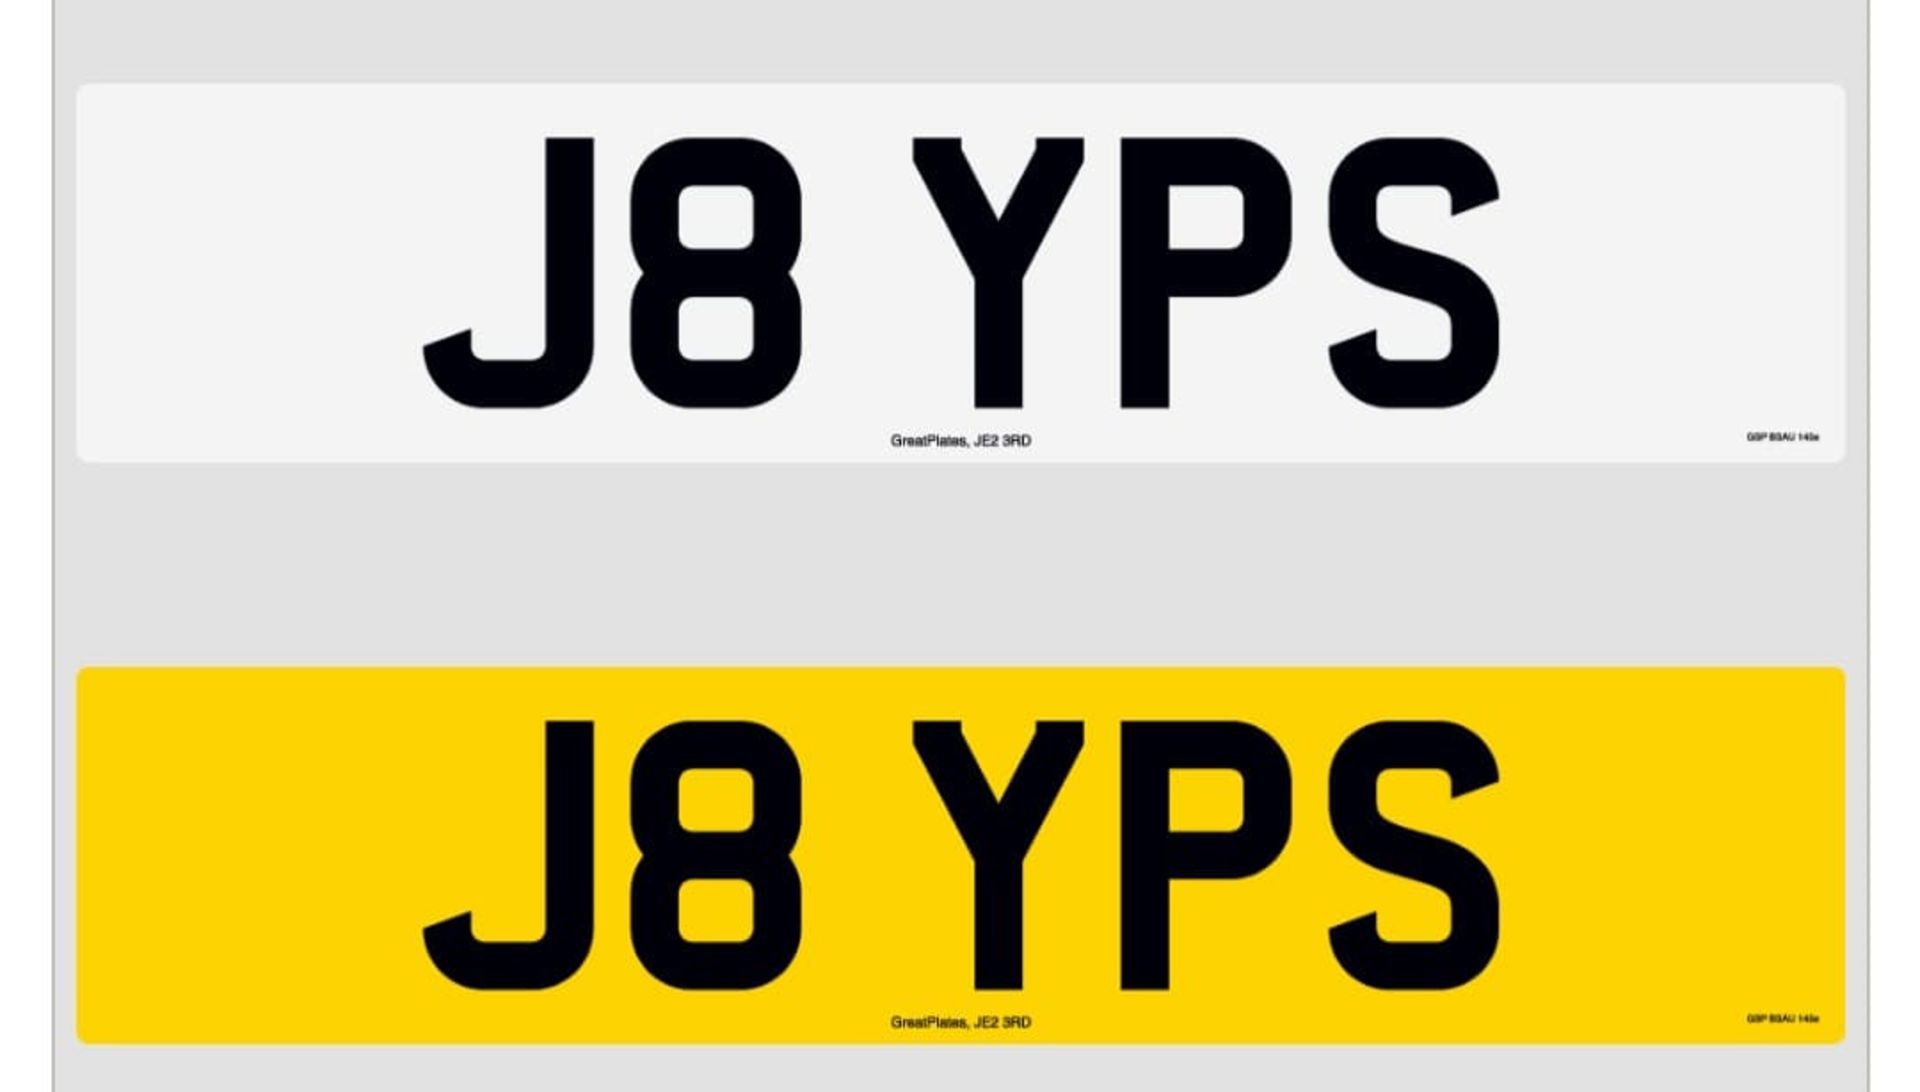 REG PLATE FOR SALE ON RETENTION - J8YPS